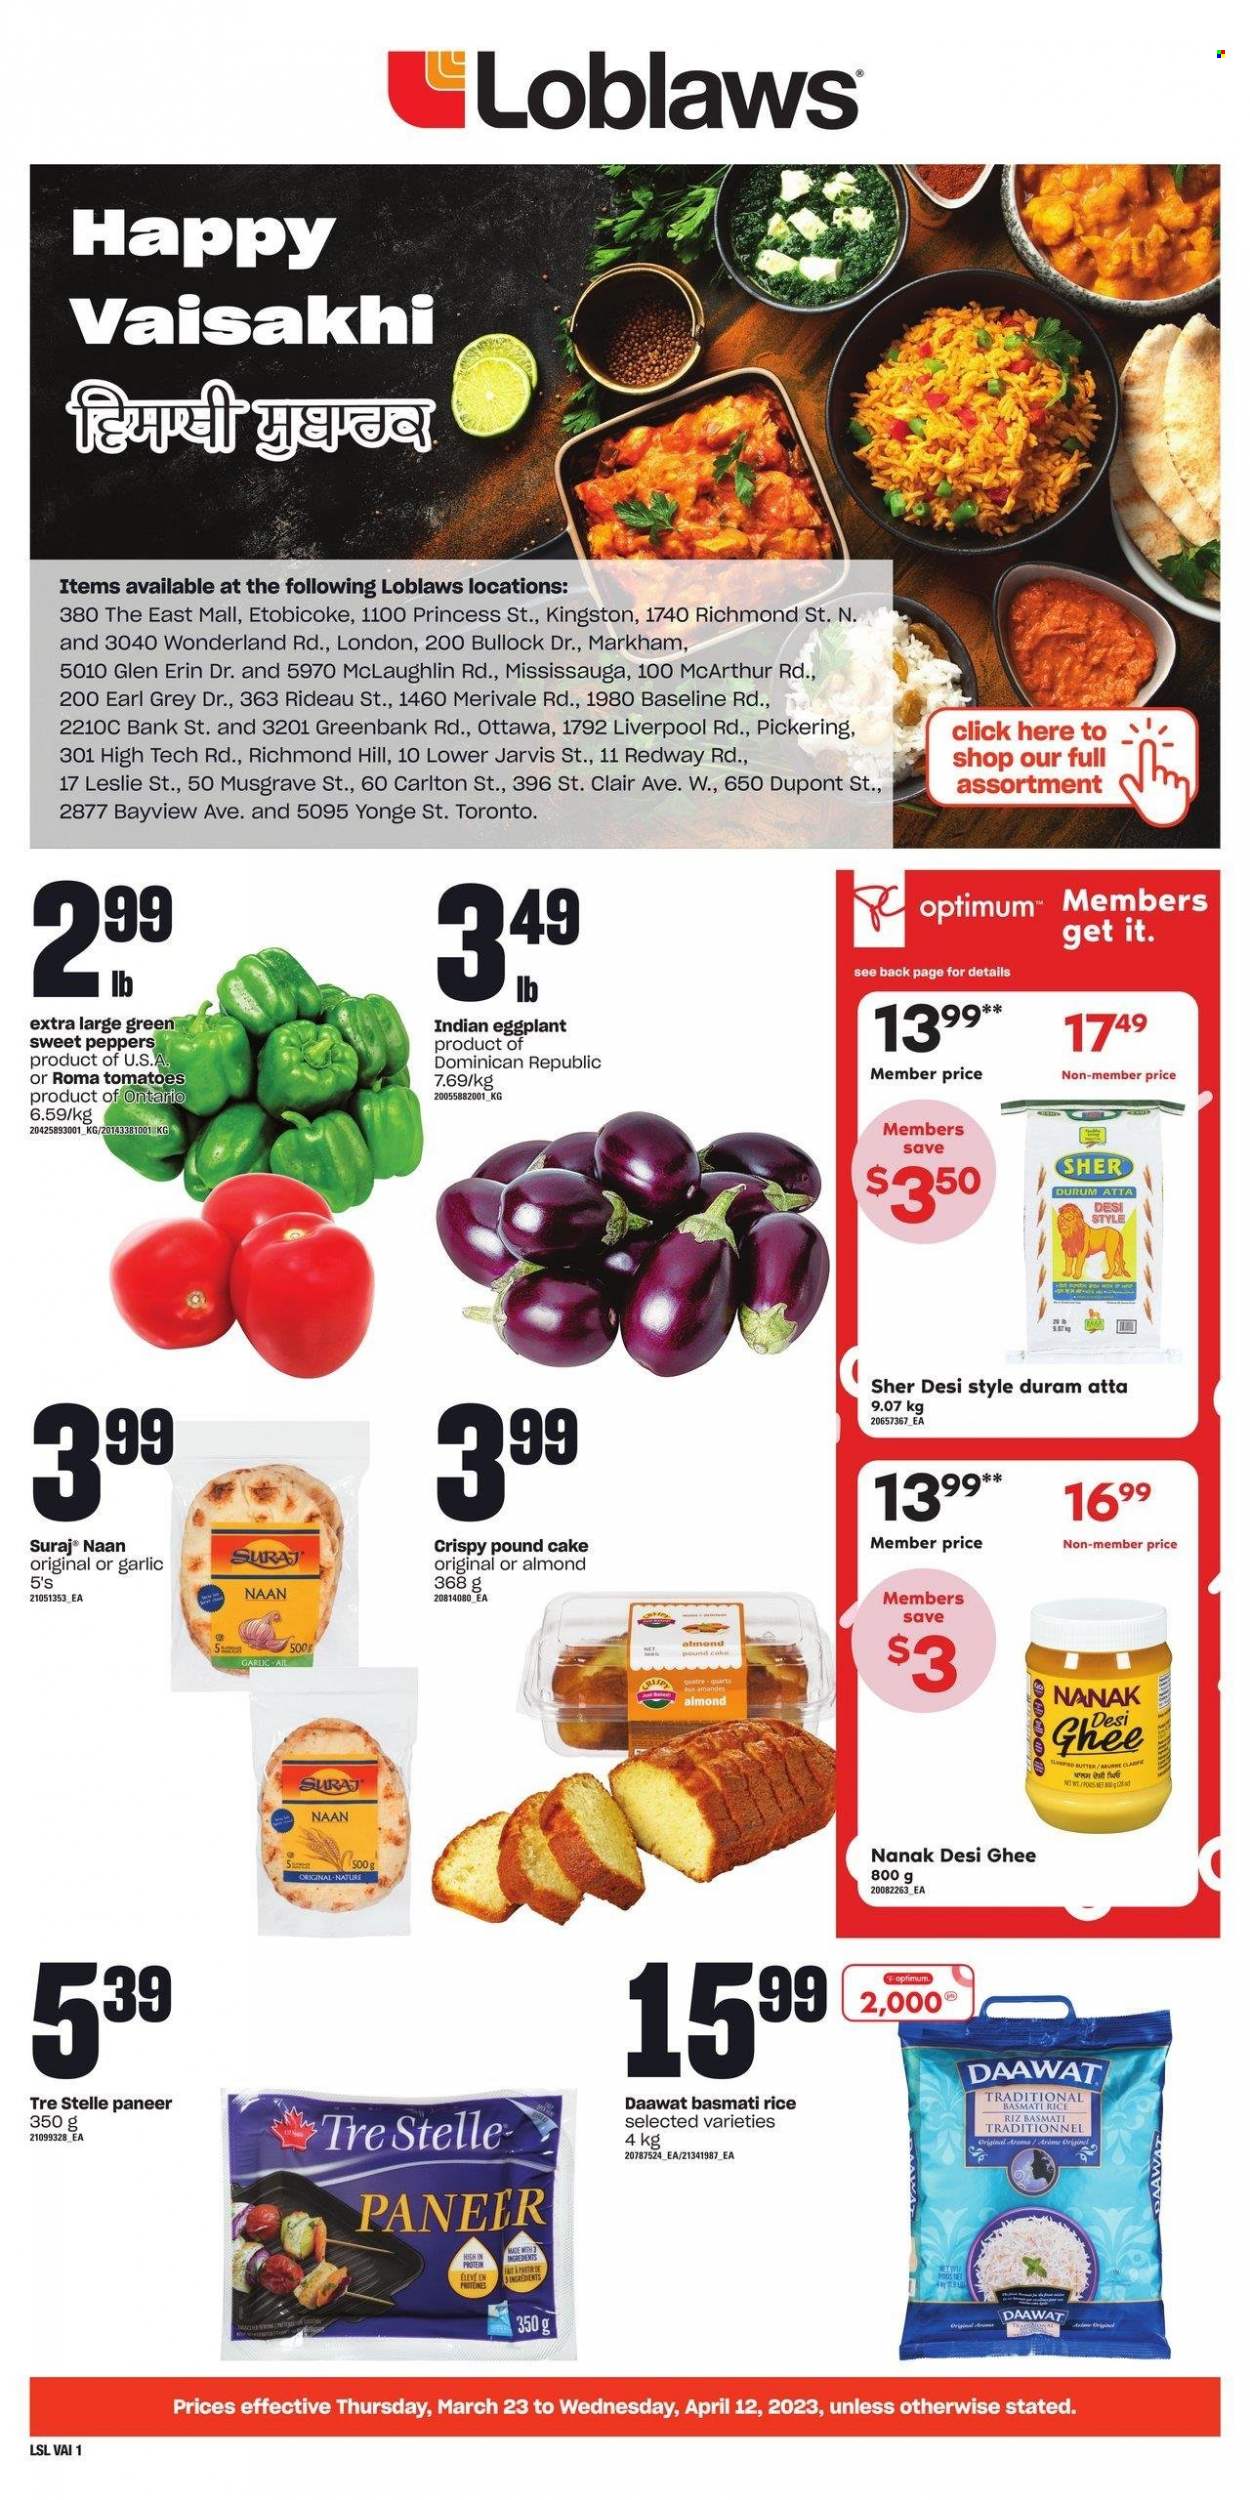 thumbnail - Loblaws Flyer - March 23, 2023 - April 12, 2023 - Sales products - cake, pound cake, garlic, sweet peppers, tomatoes, peppers, eggplant, paneer, ghee, flour, basmati rice, Optimum. Page 1.